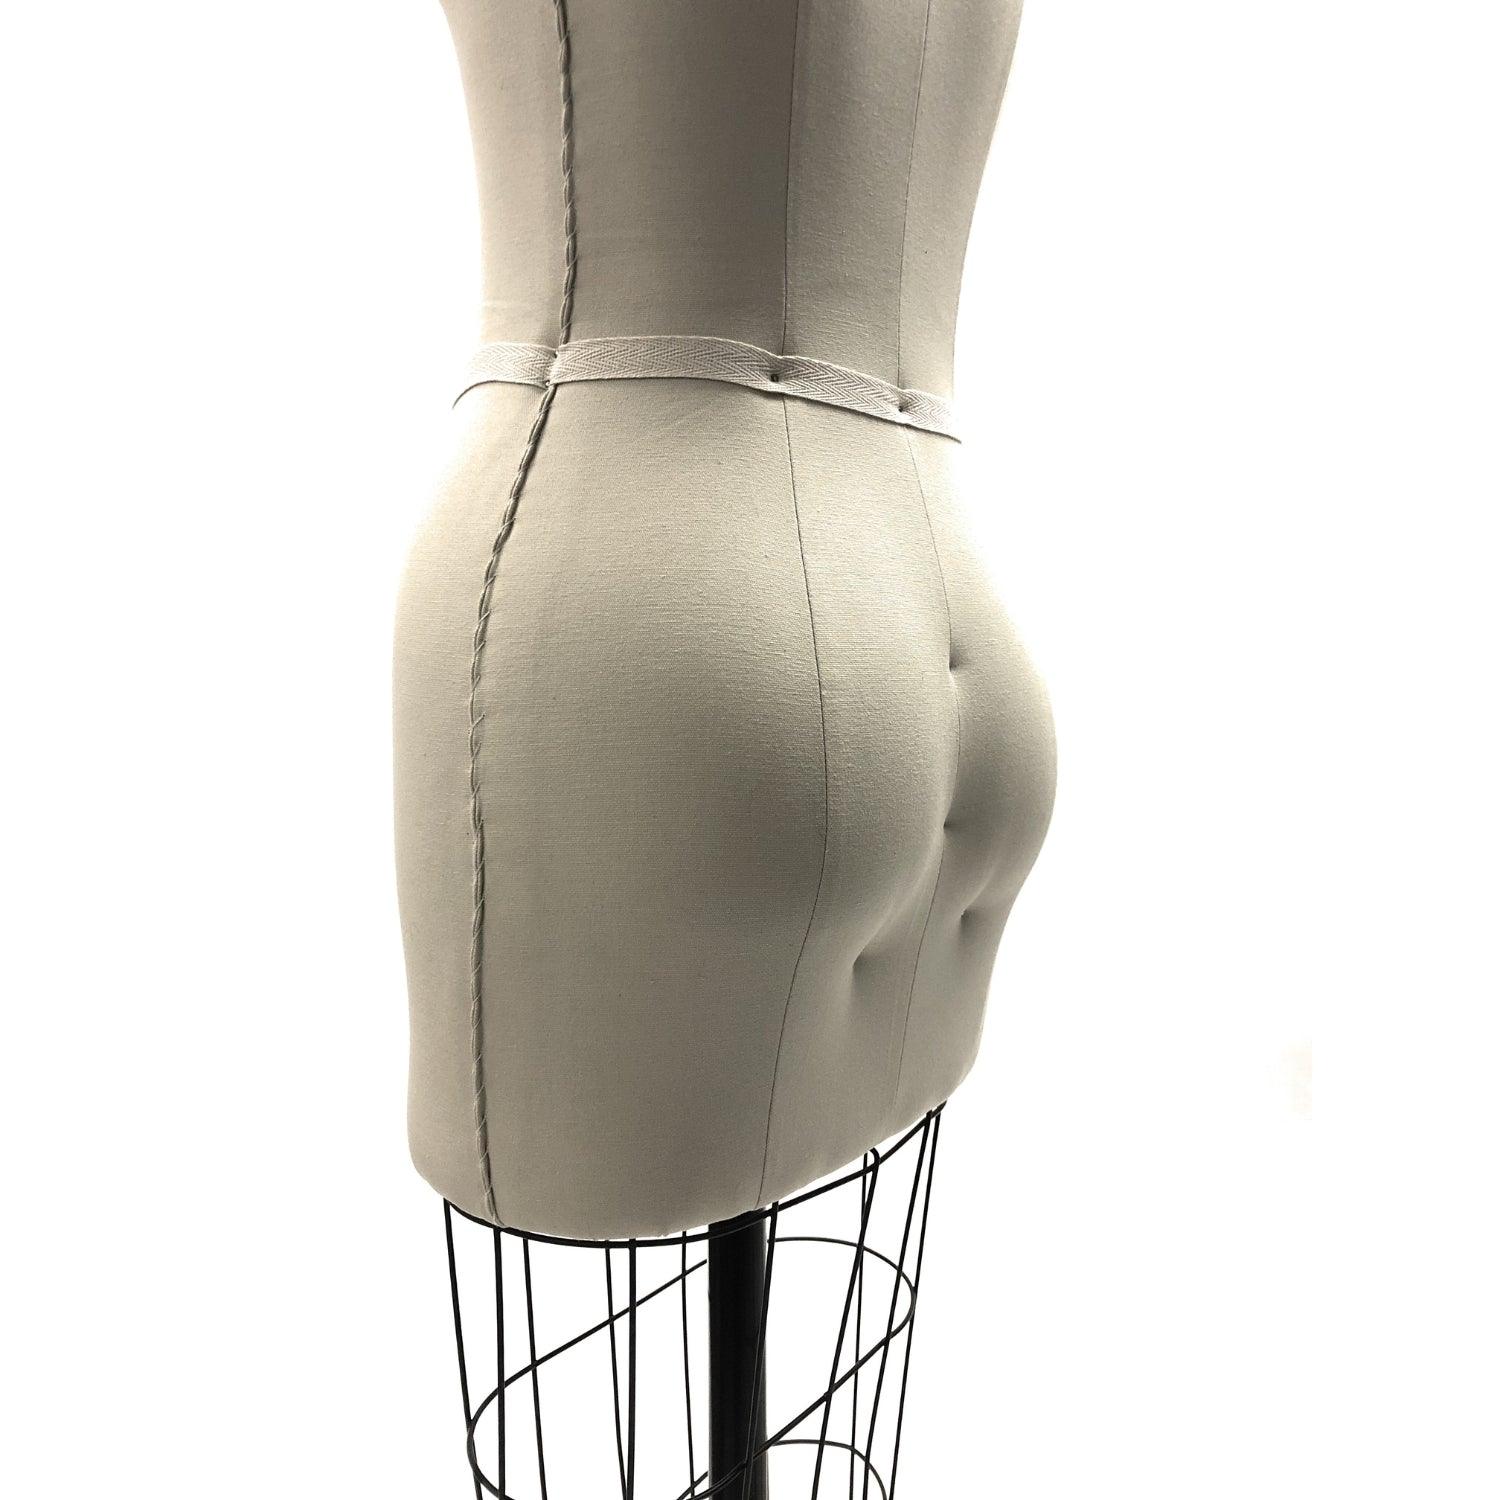 Female Dress Form with Chrome Rolling Base - Mannequin Mall